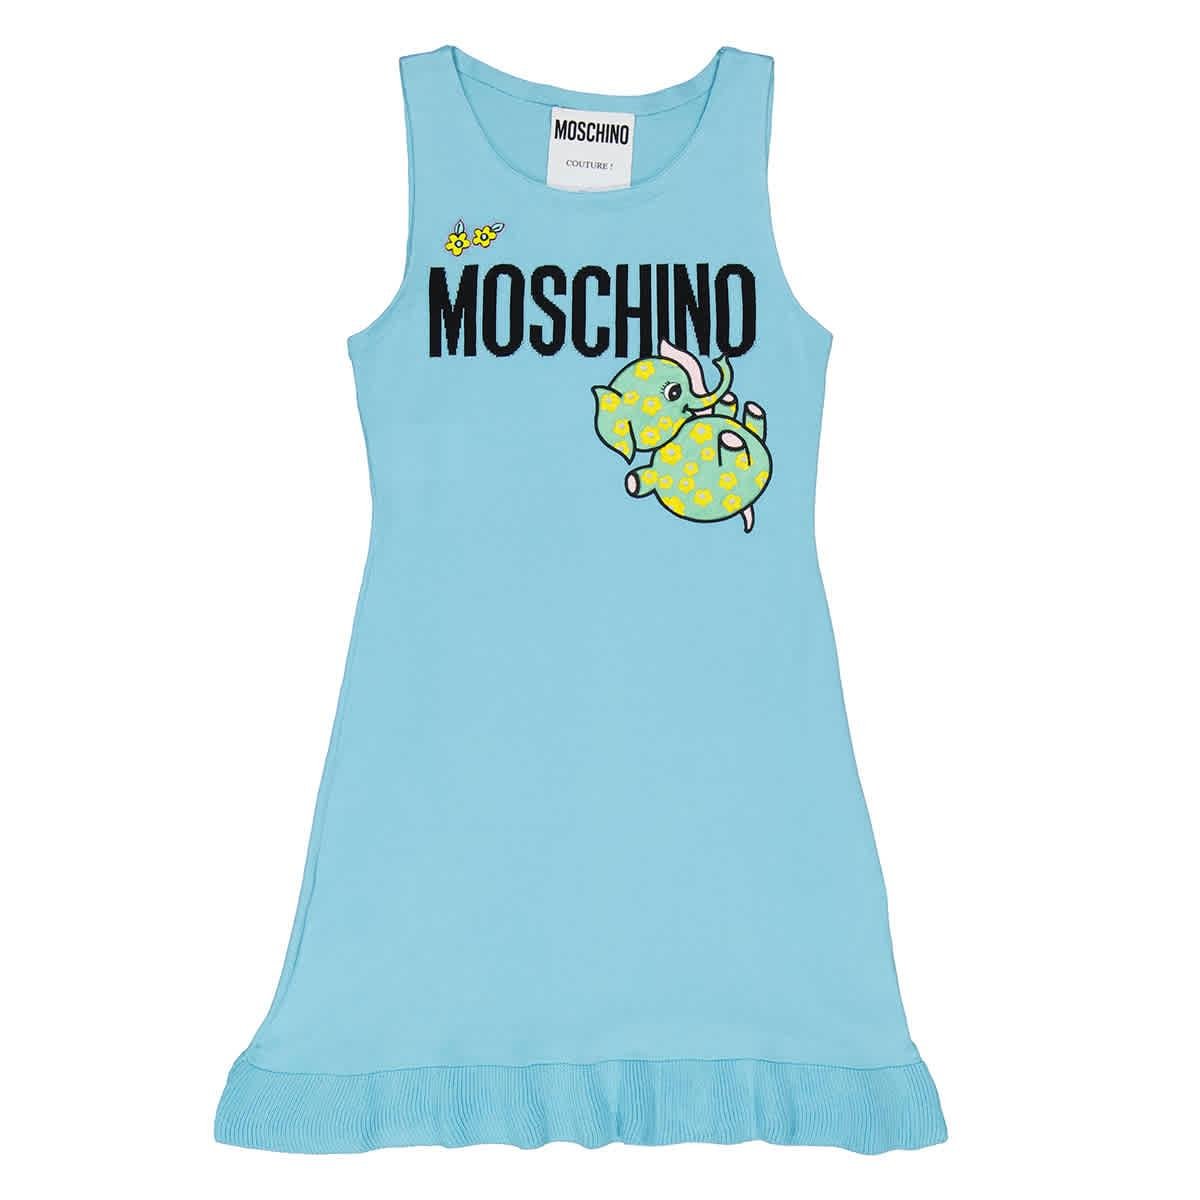 Moschino Ladies Light Blue Ribbed-Knit Scoop Neck Dress by MOSCHINO